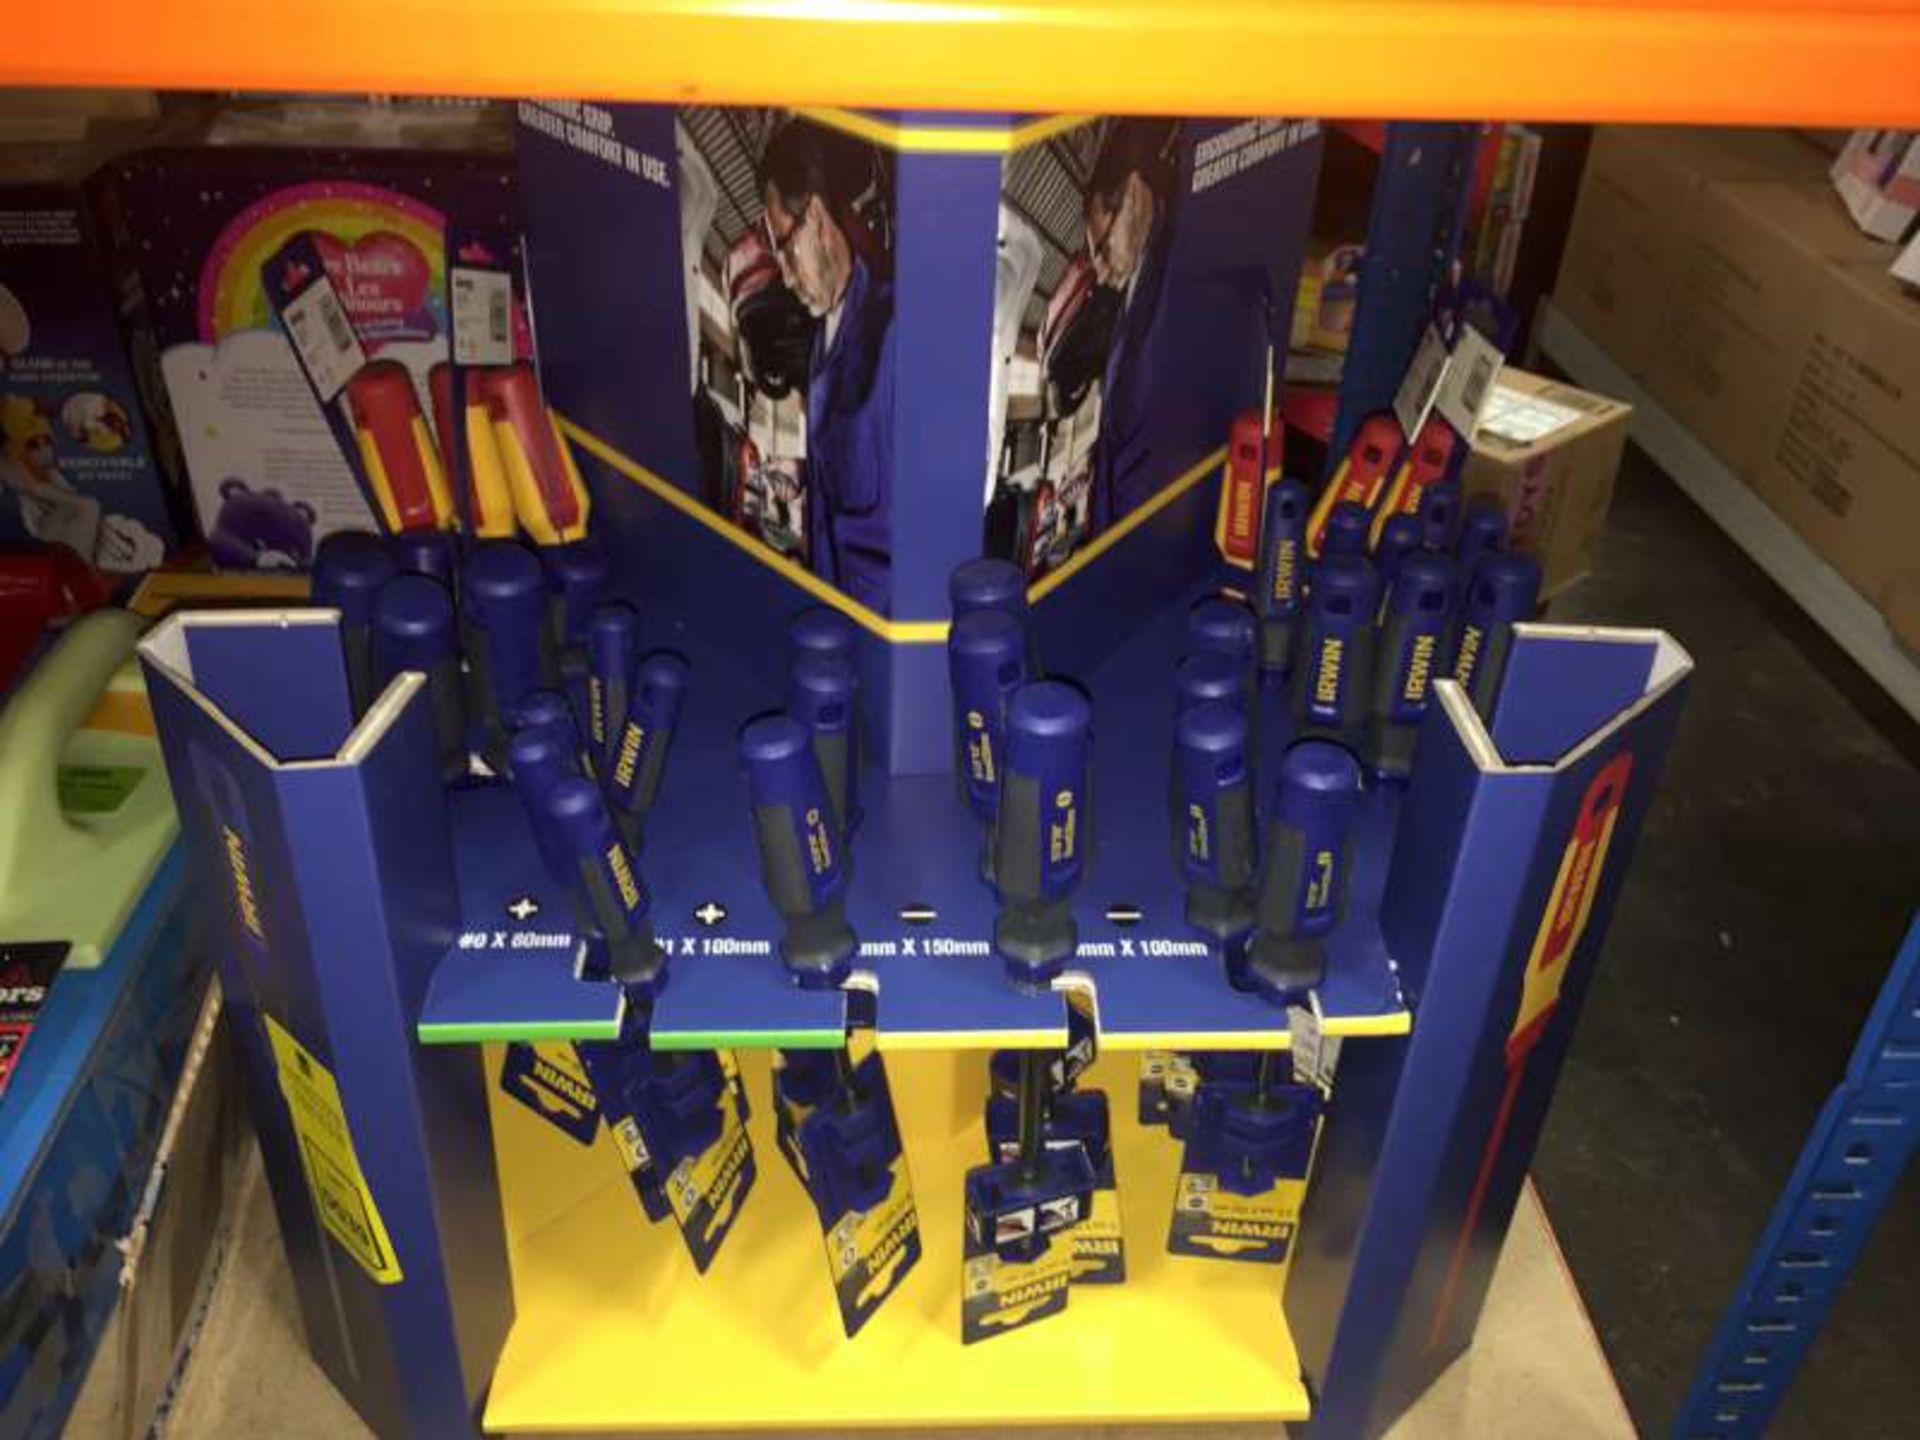 CARDBOARD COUNTER STAND CONTAINING 60 BRAND NEW VARIOUS IRWIN SCREWDRIVERS